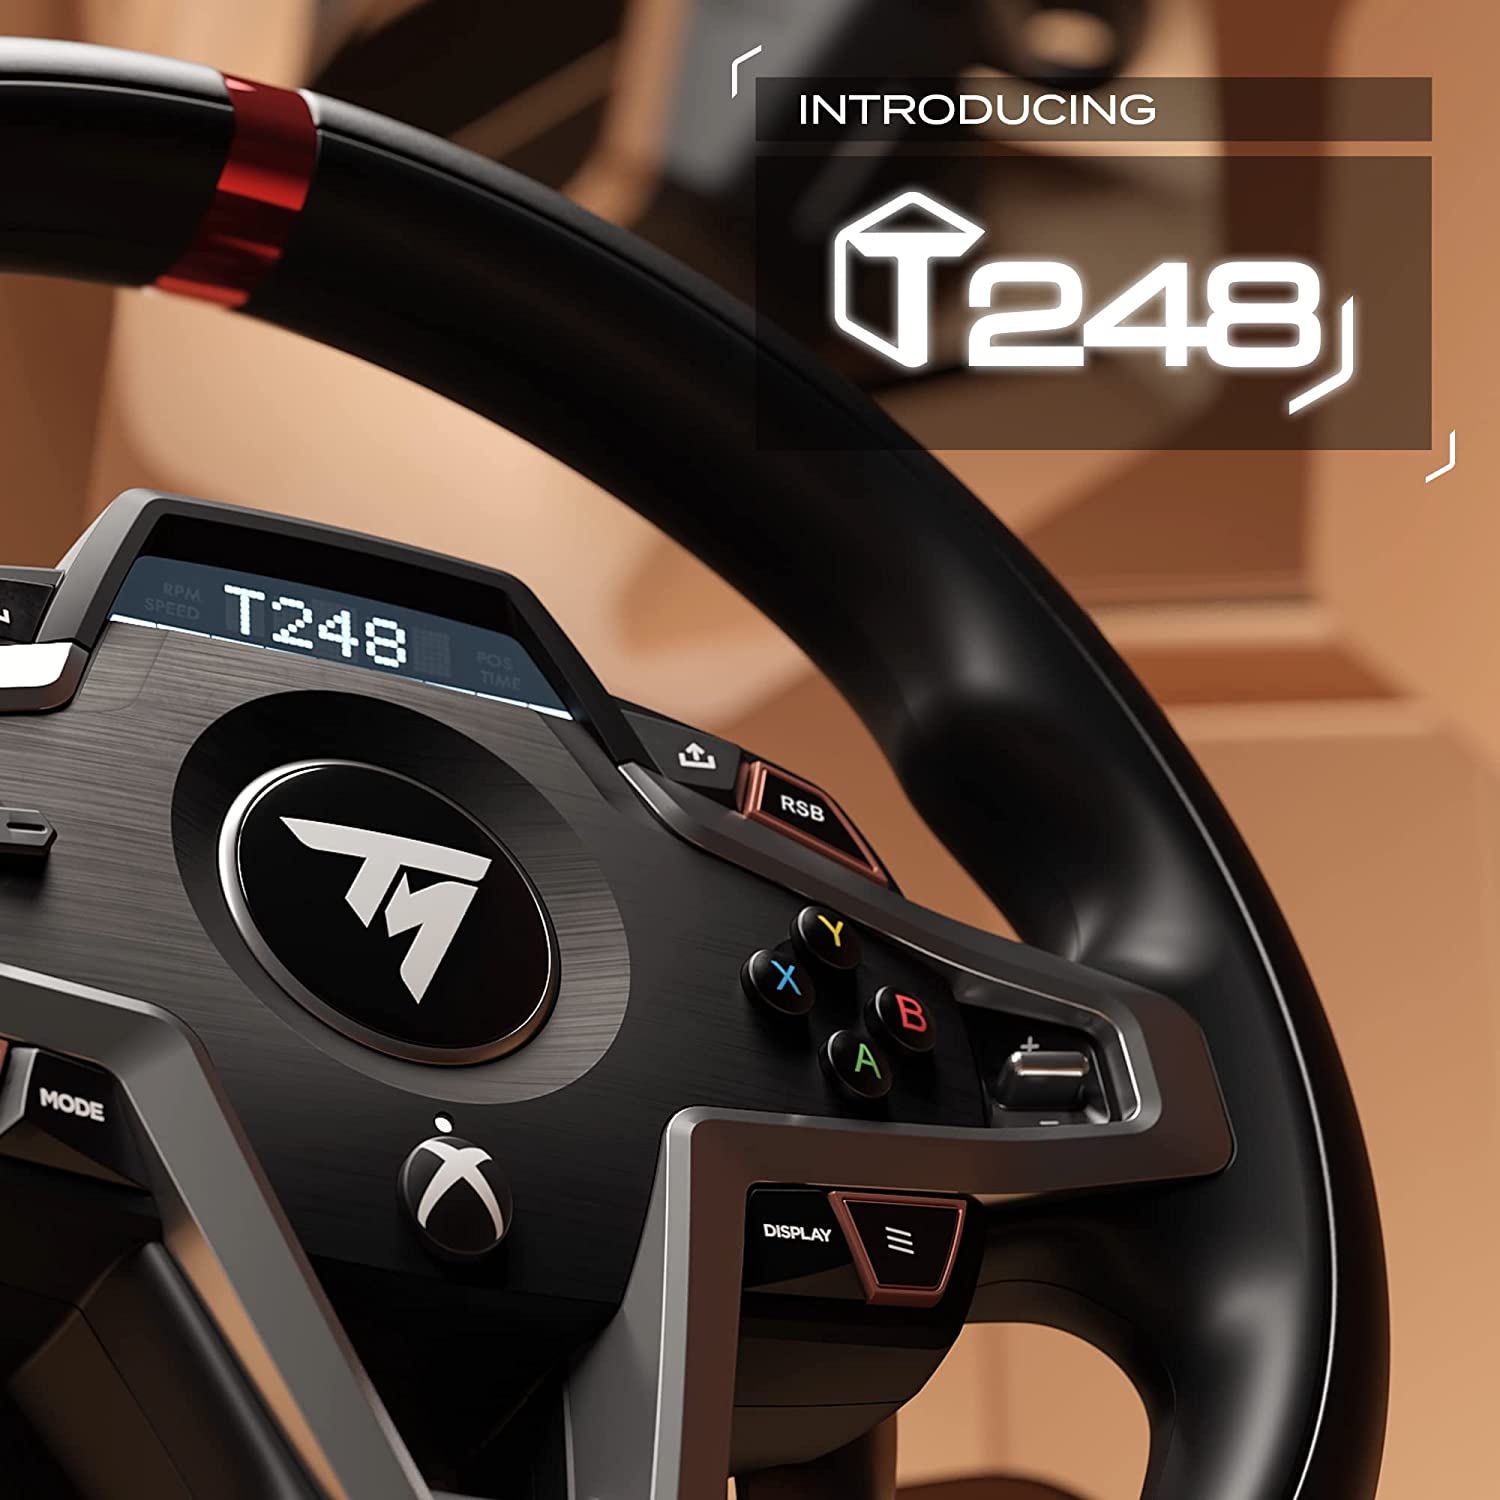 Thrustmaster T248, Magnetic Paddle Shifters, Dynamic Force Feedback,  Racing